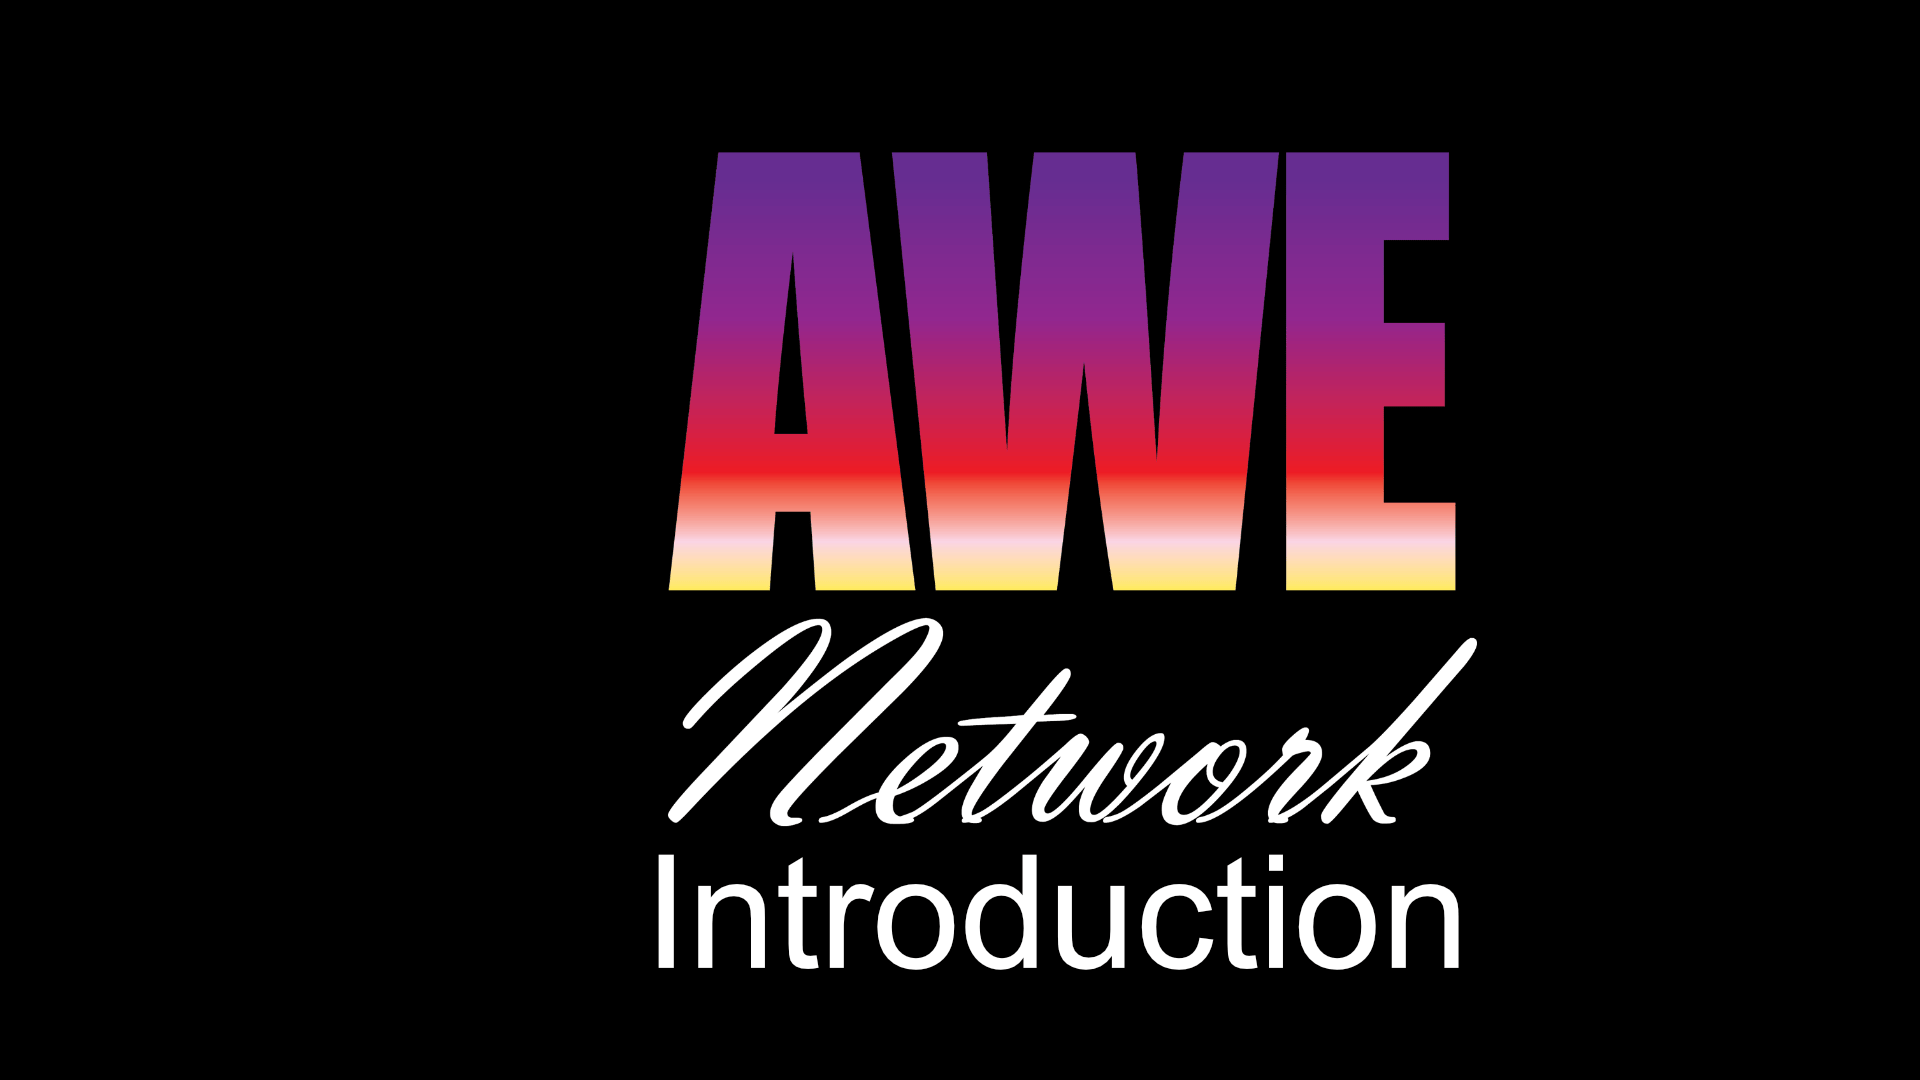 Welcome to the AWE Network